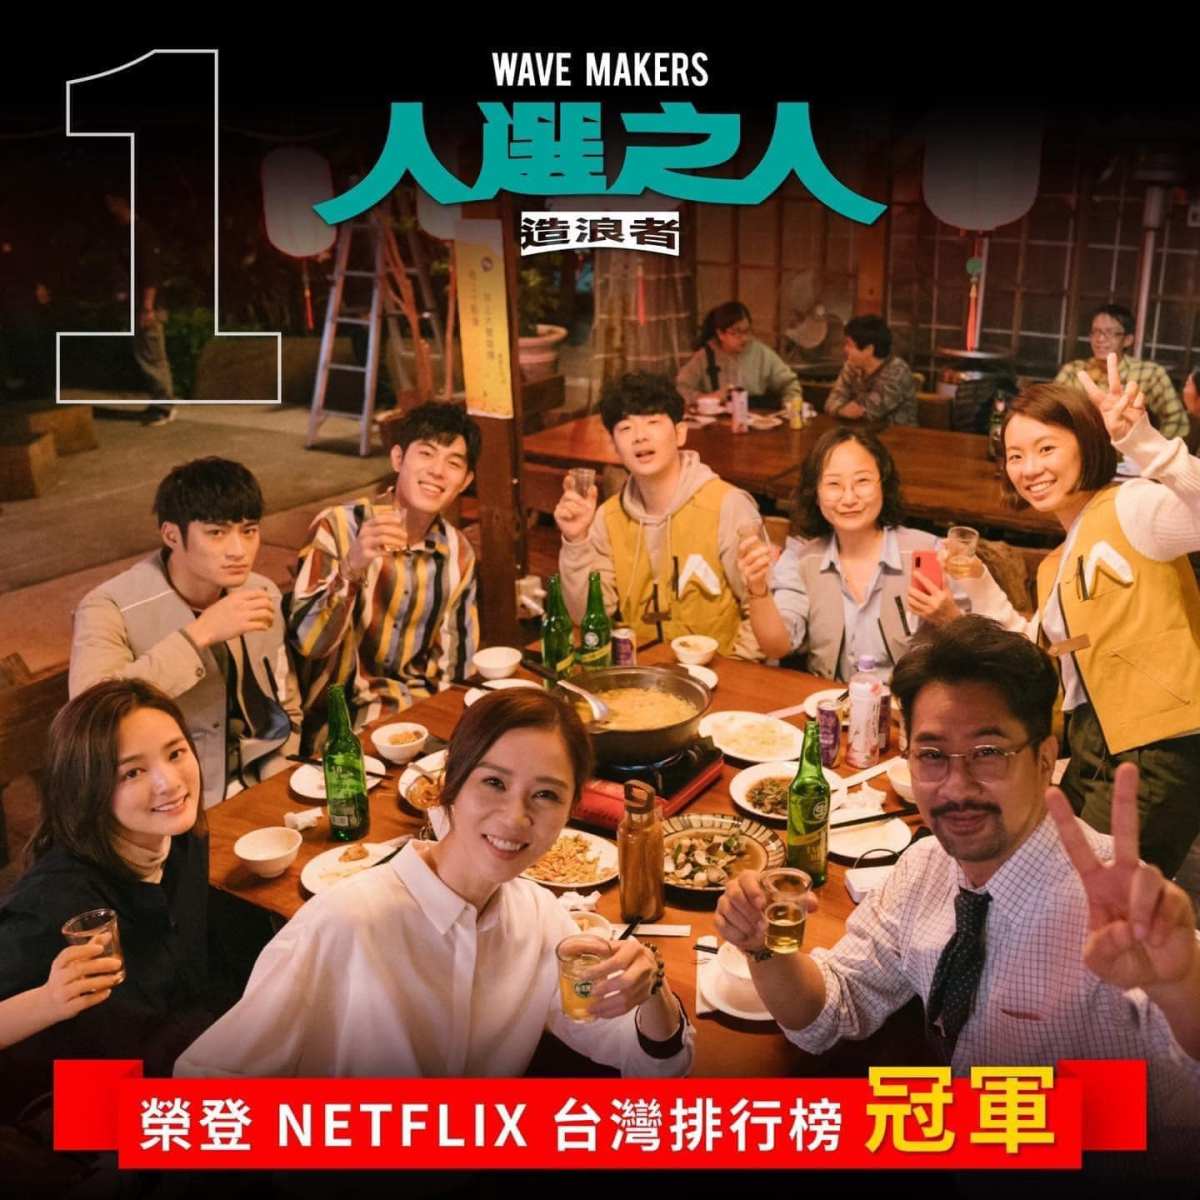 Cast members of Wave Makers dining at a restaurant in Taiwan. Text in Chinese characters says that Wave Makers in number one in Taiwan on Netflix